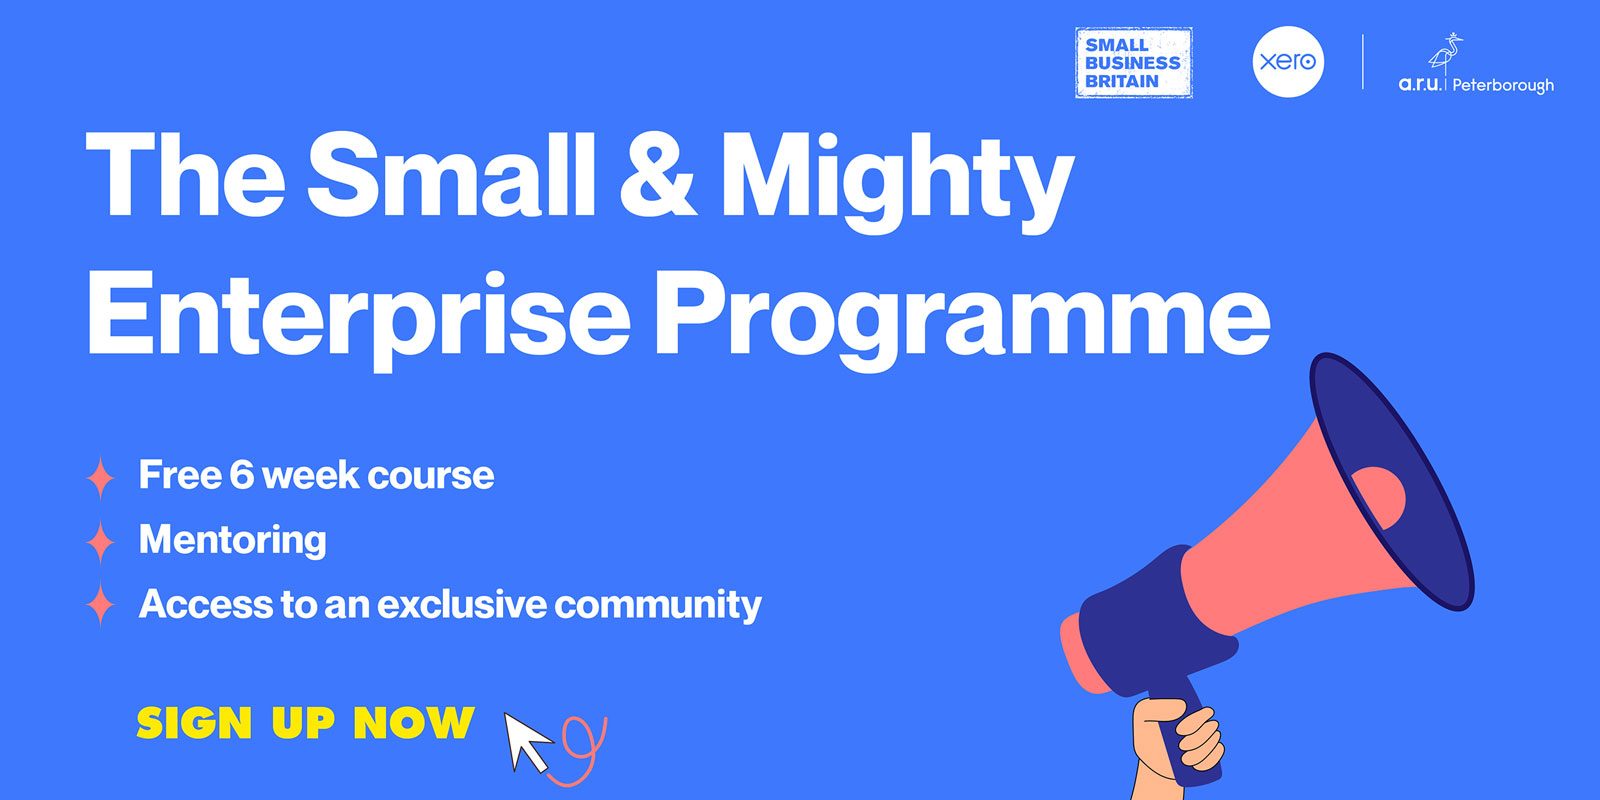 Small & Mighty Programme